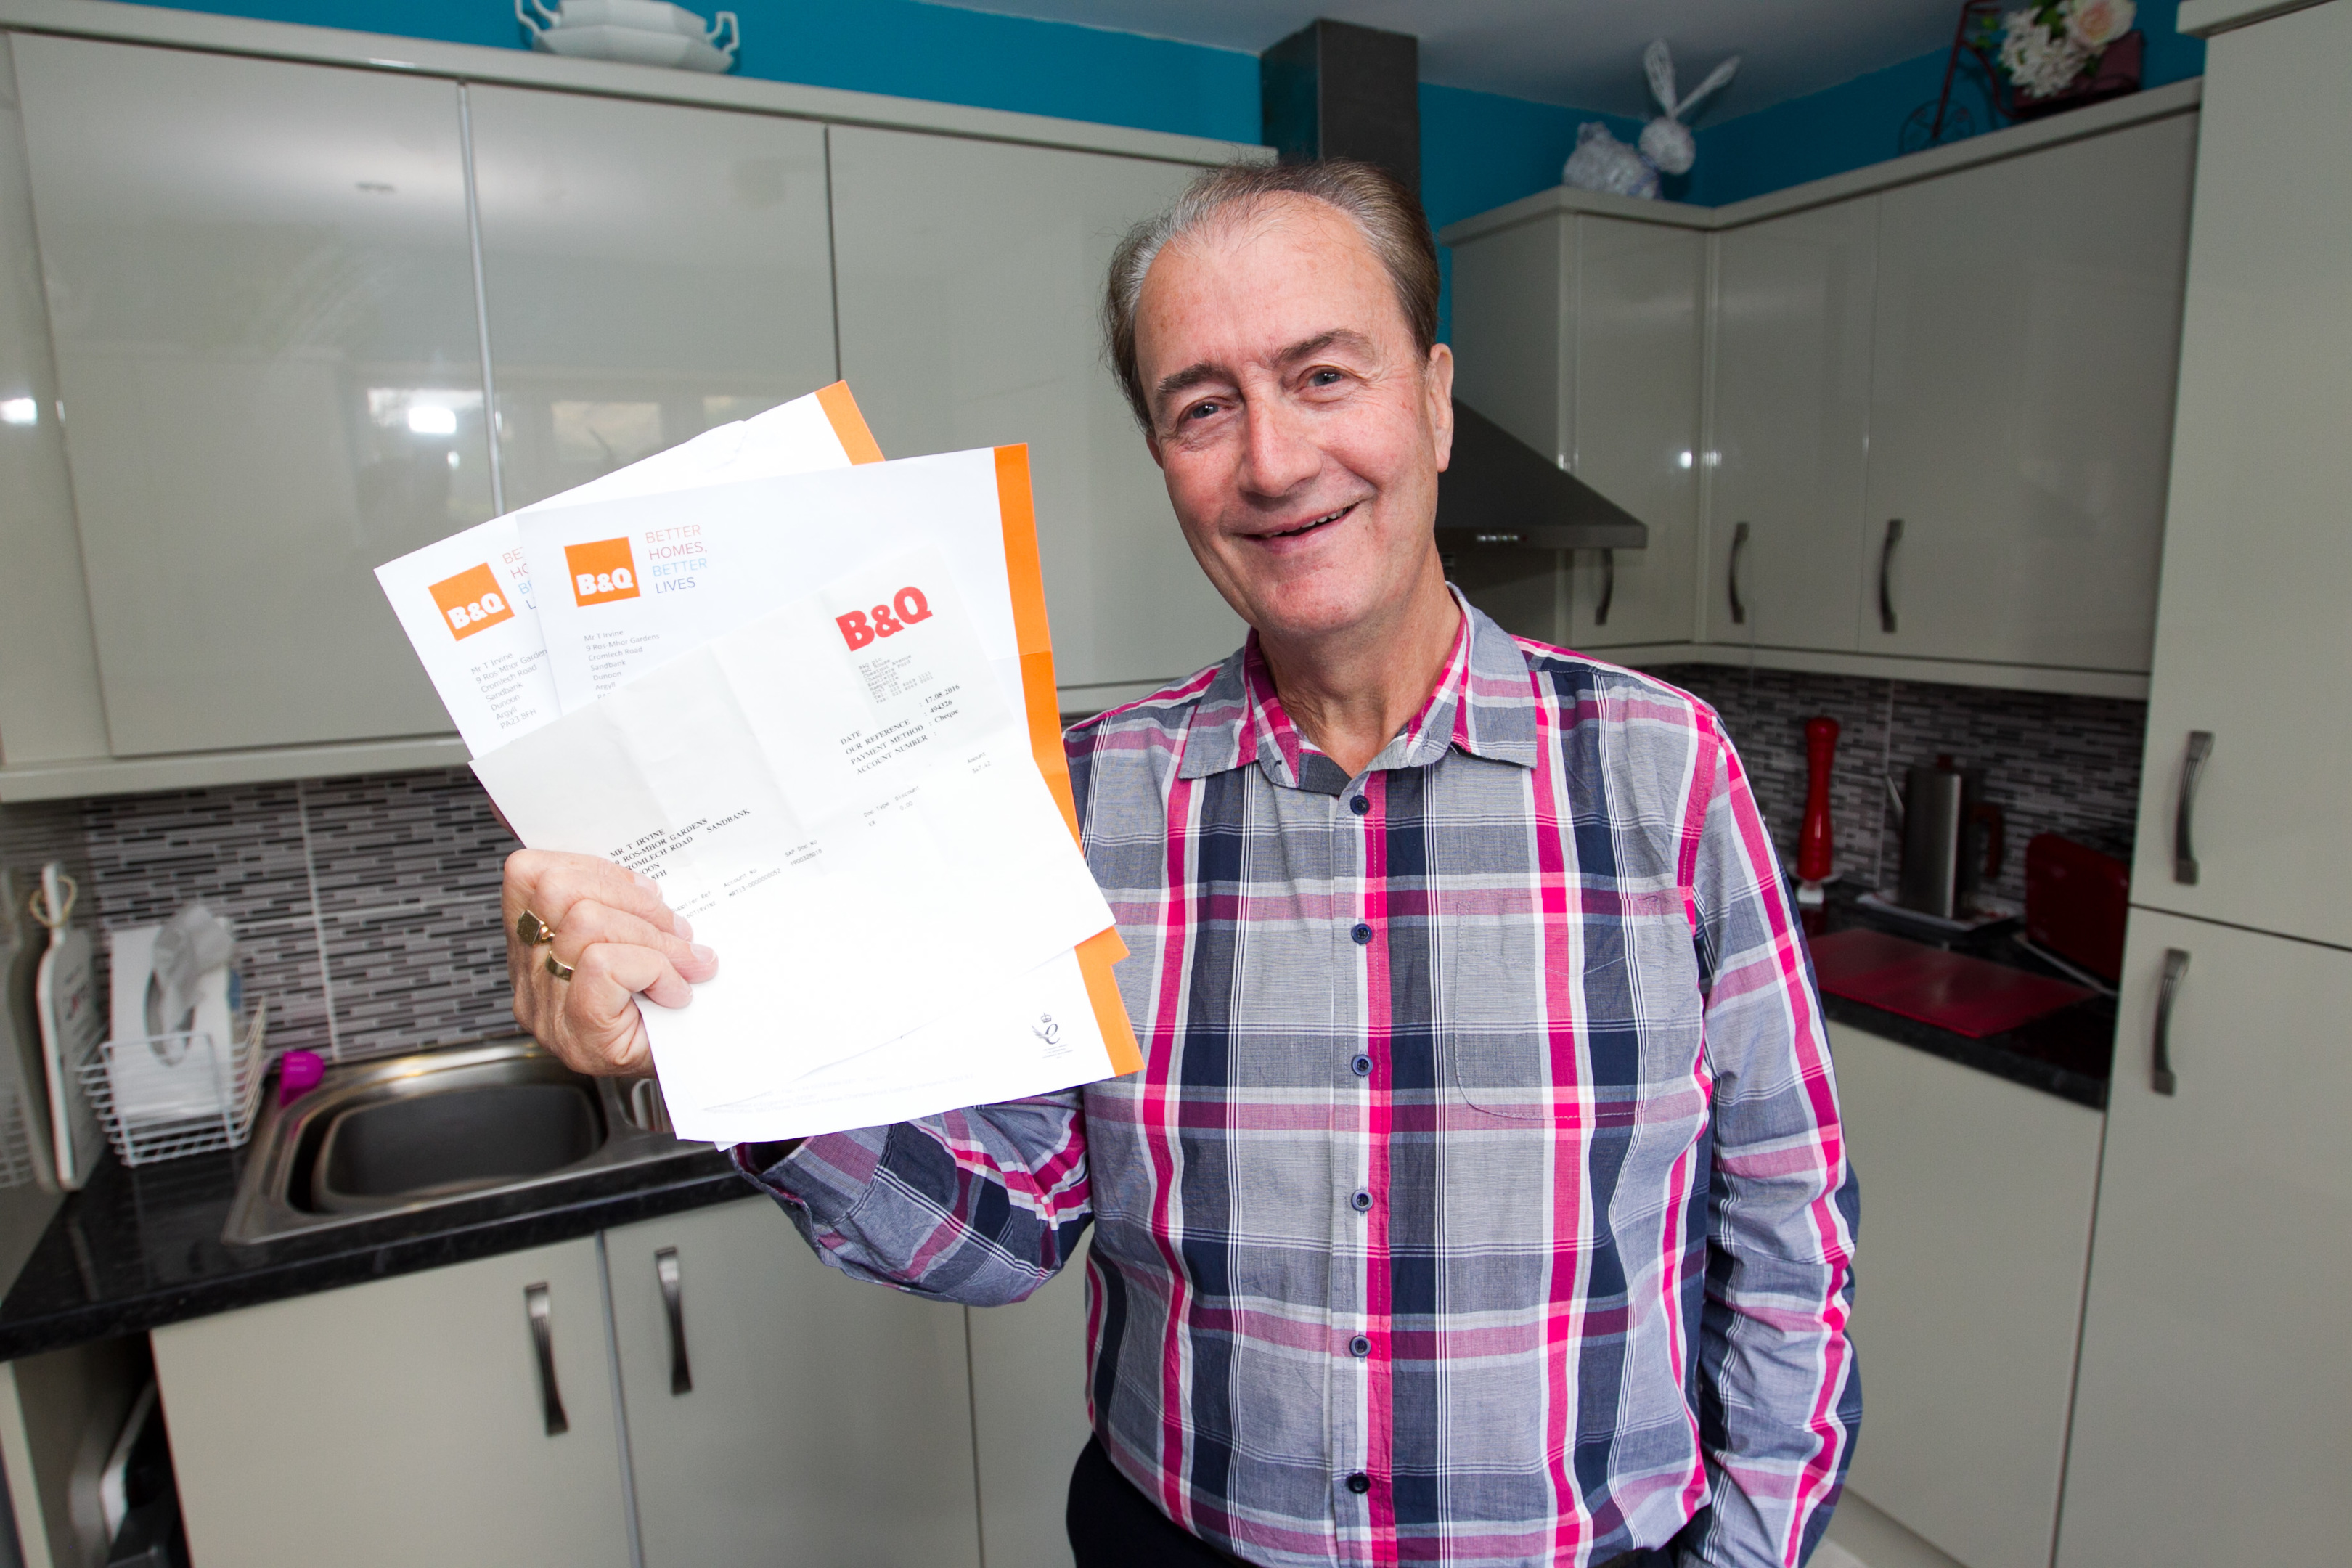 Tom Irvine, who is happy after Raw Deal helped him resolve a problem he had with B&Q (Andrew Cawley/DC Thomson)